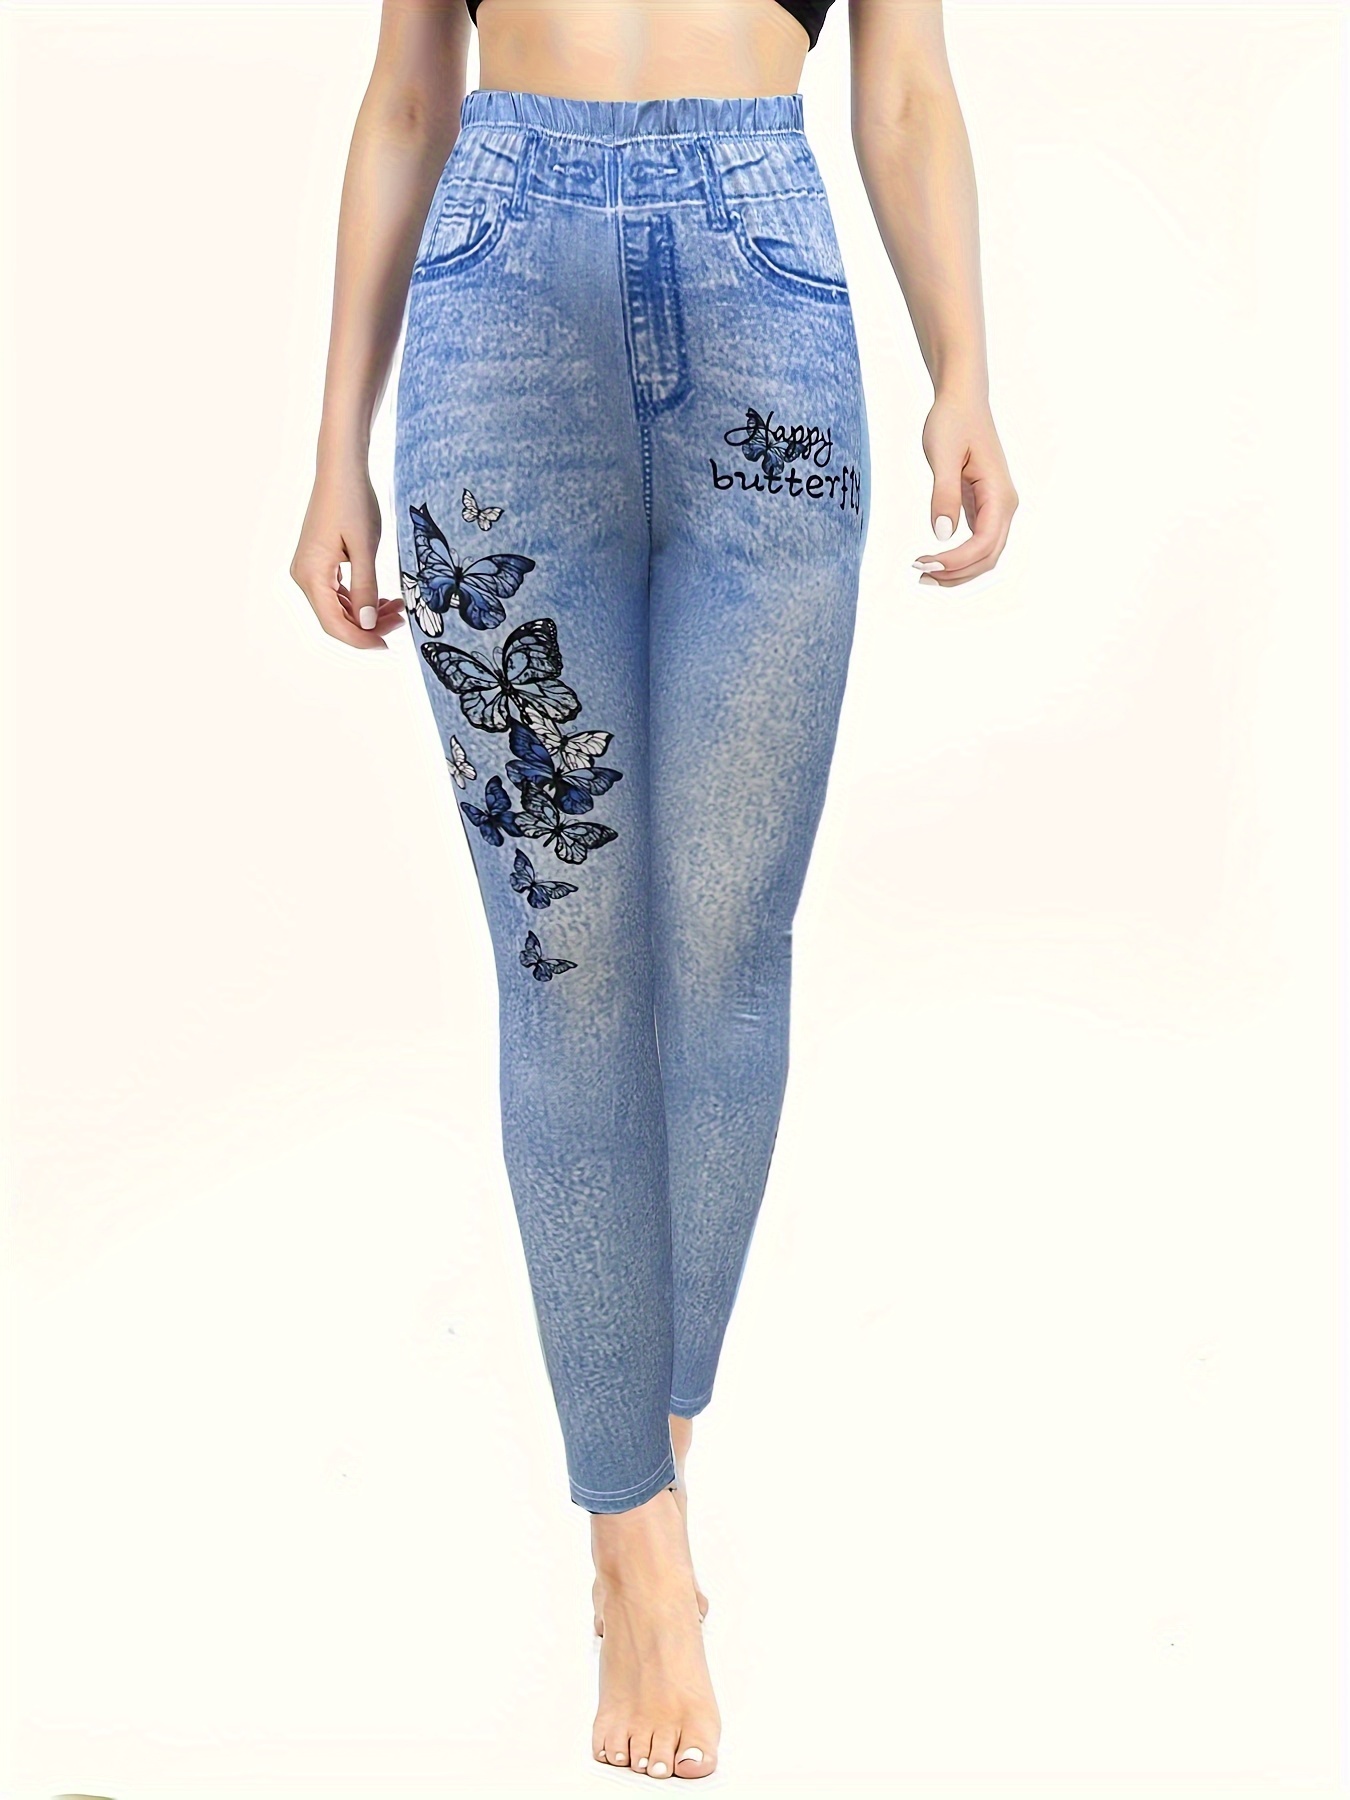 Butterfly Print Cut Out Leggings